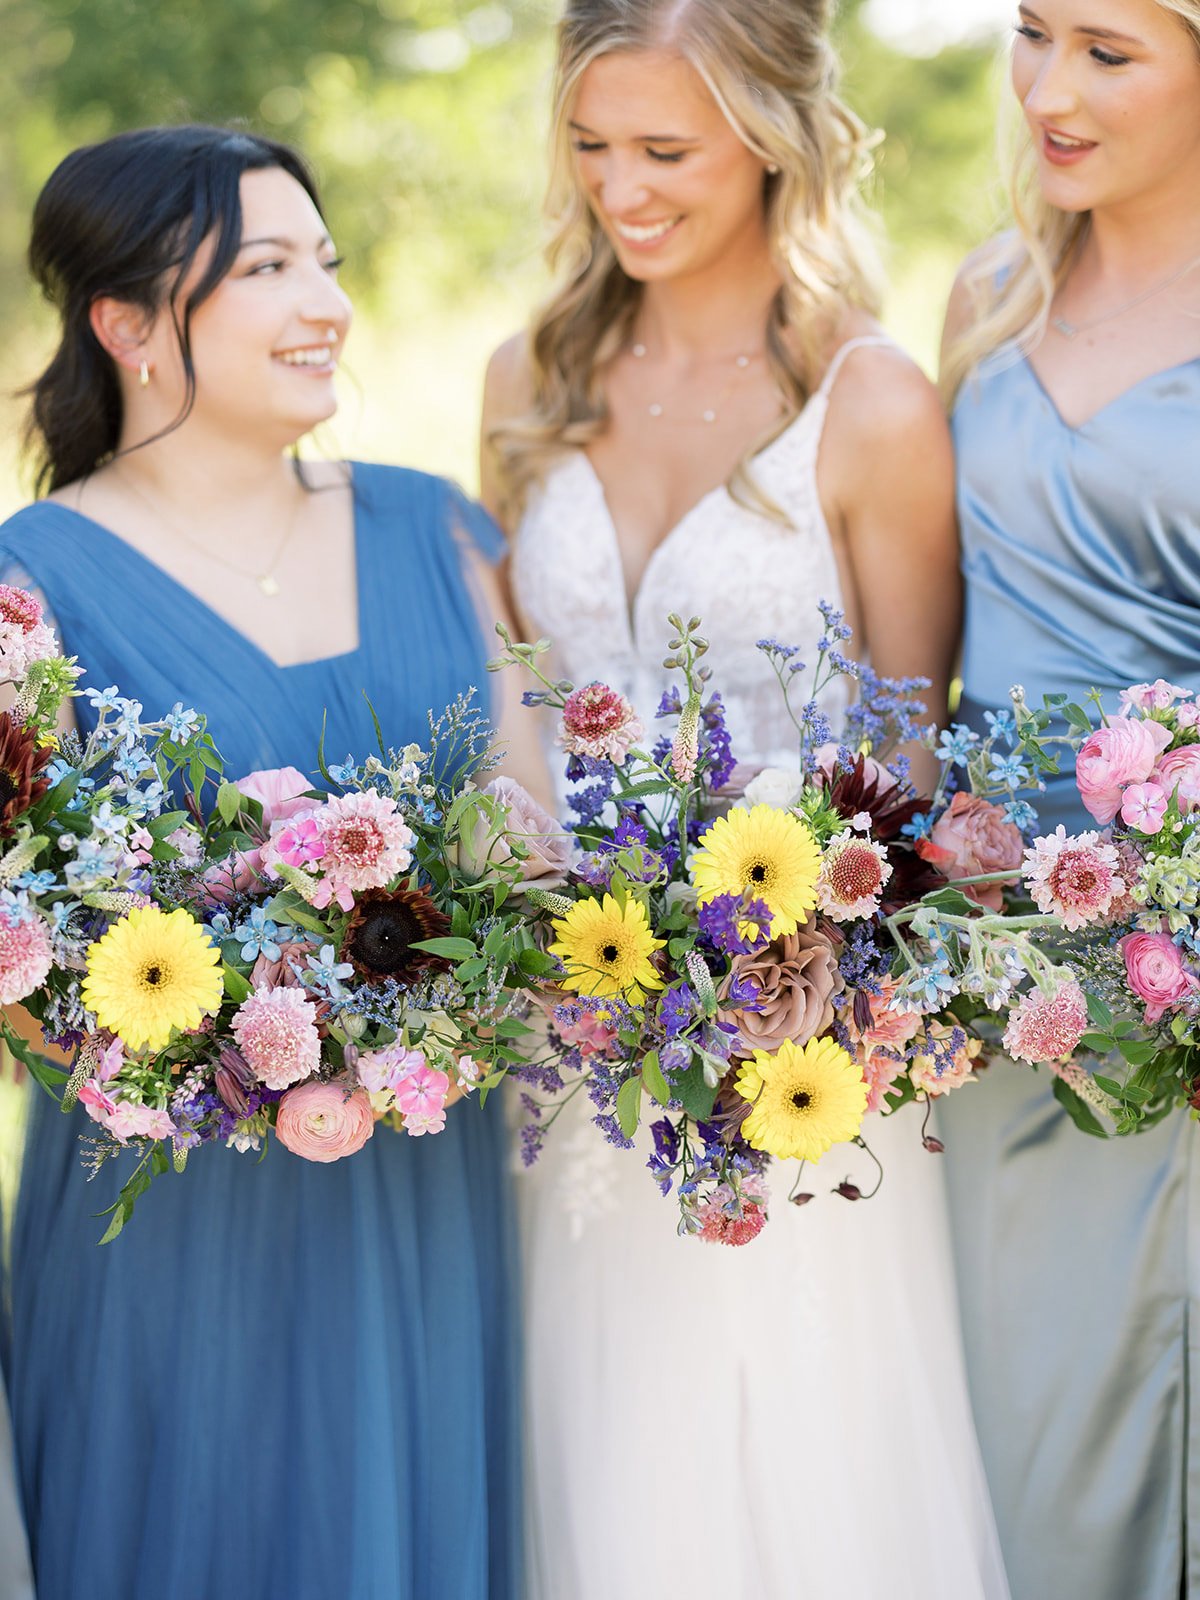 Colorful wildflower bouquets inspired by Montana wildflowers designed by Montana wedding planner Shannon Rose Events